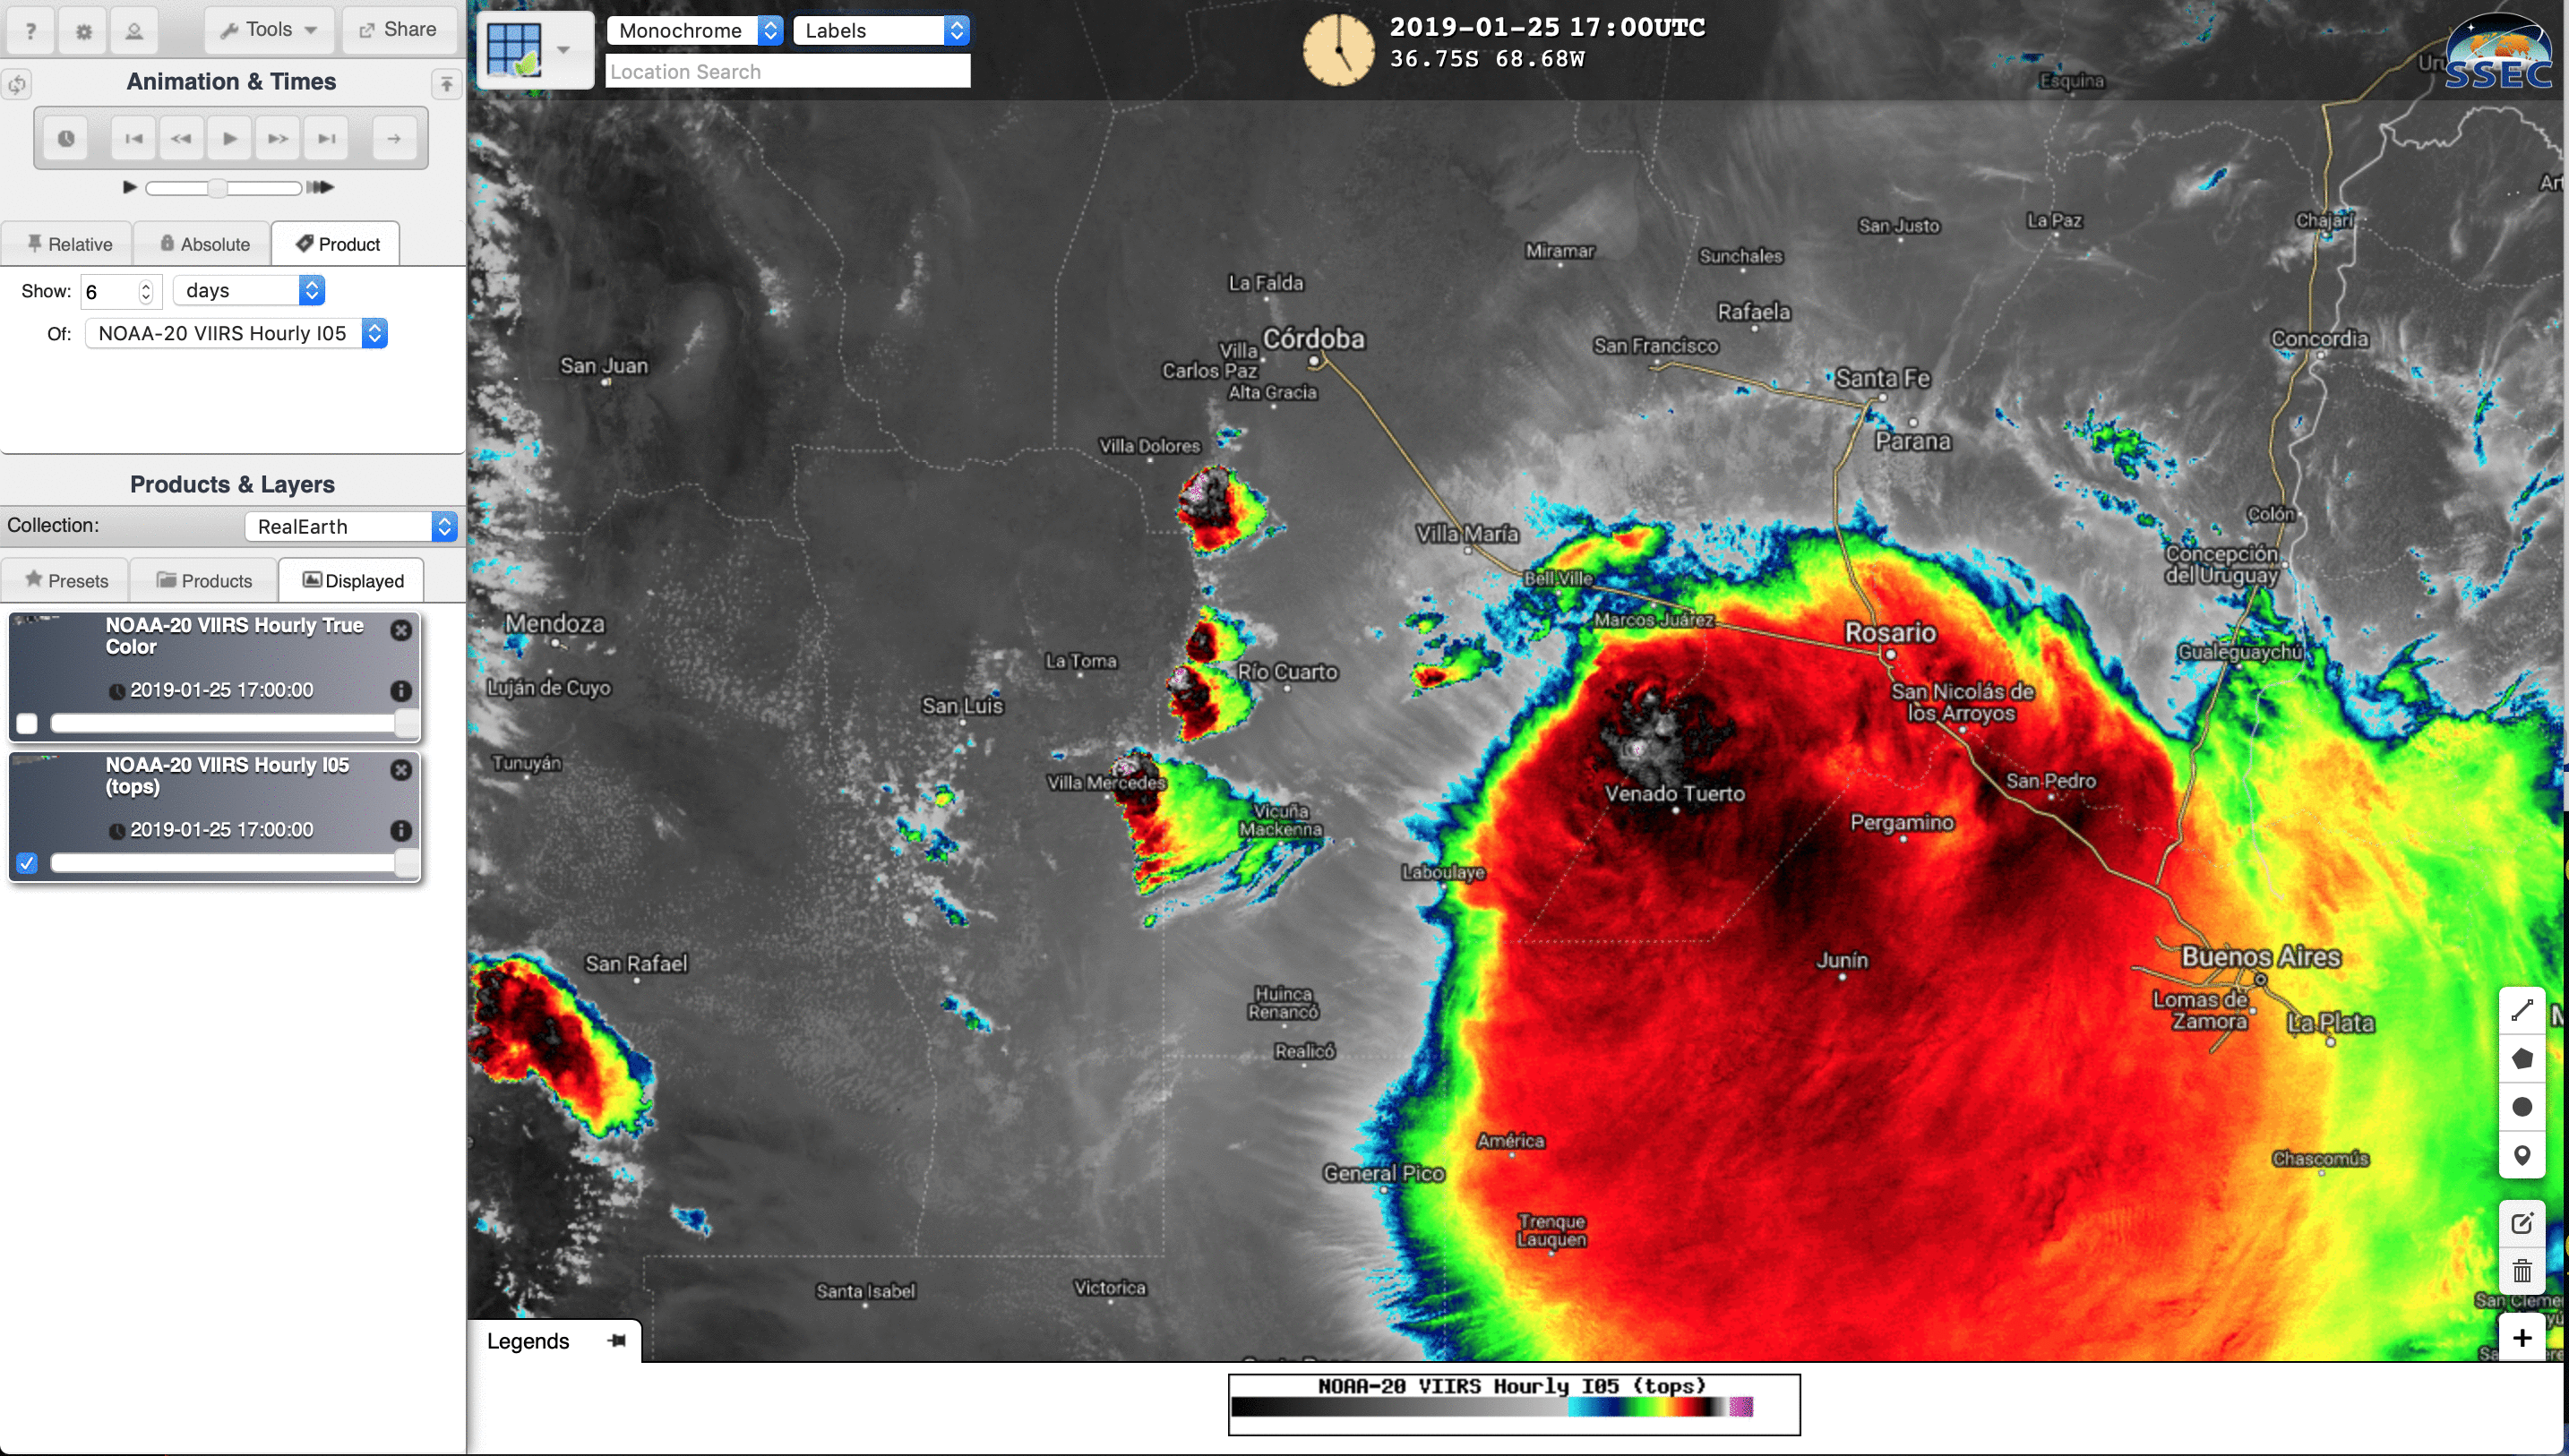 NOAA-20 VIIRS True Color Red-Green-Blue (RGB) and Infrared Window (11.45 µm) images [click to enlarge]